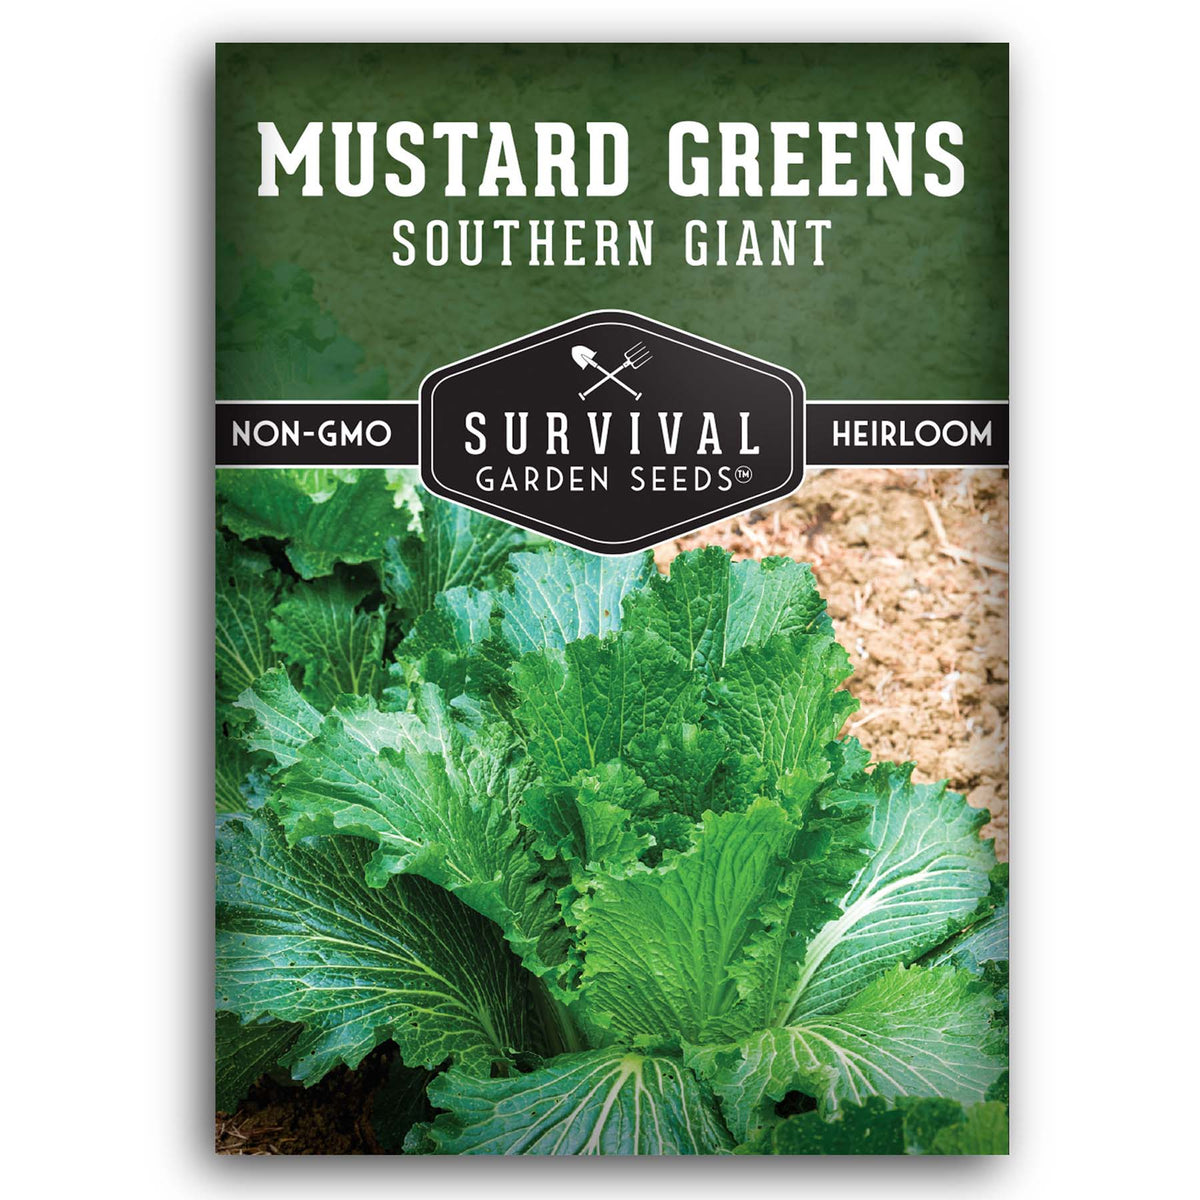 Southern Giant Mustard Greens seeds